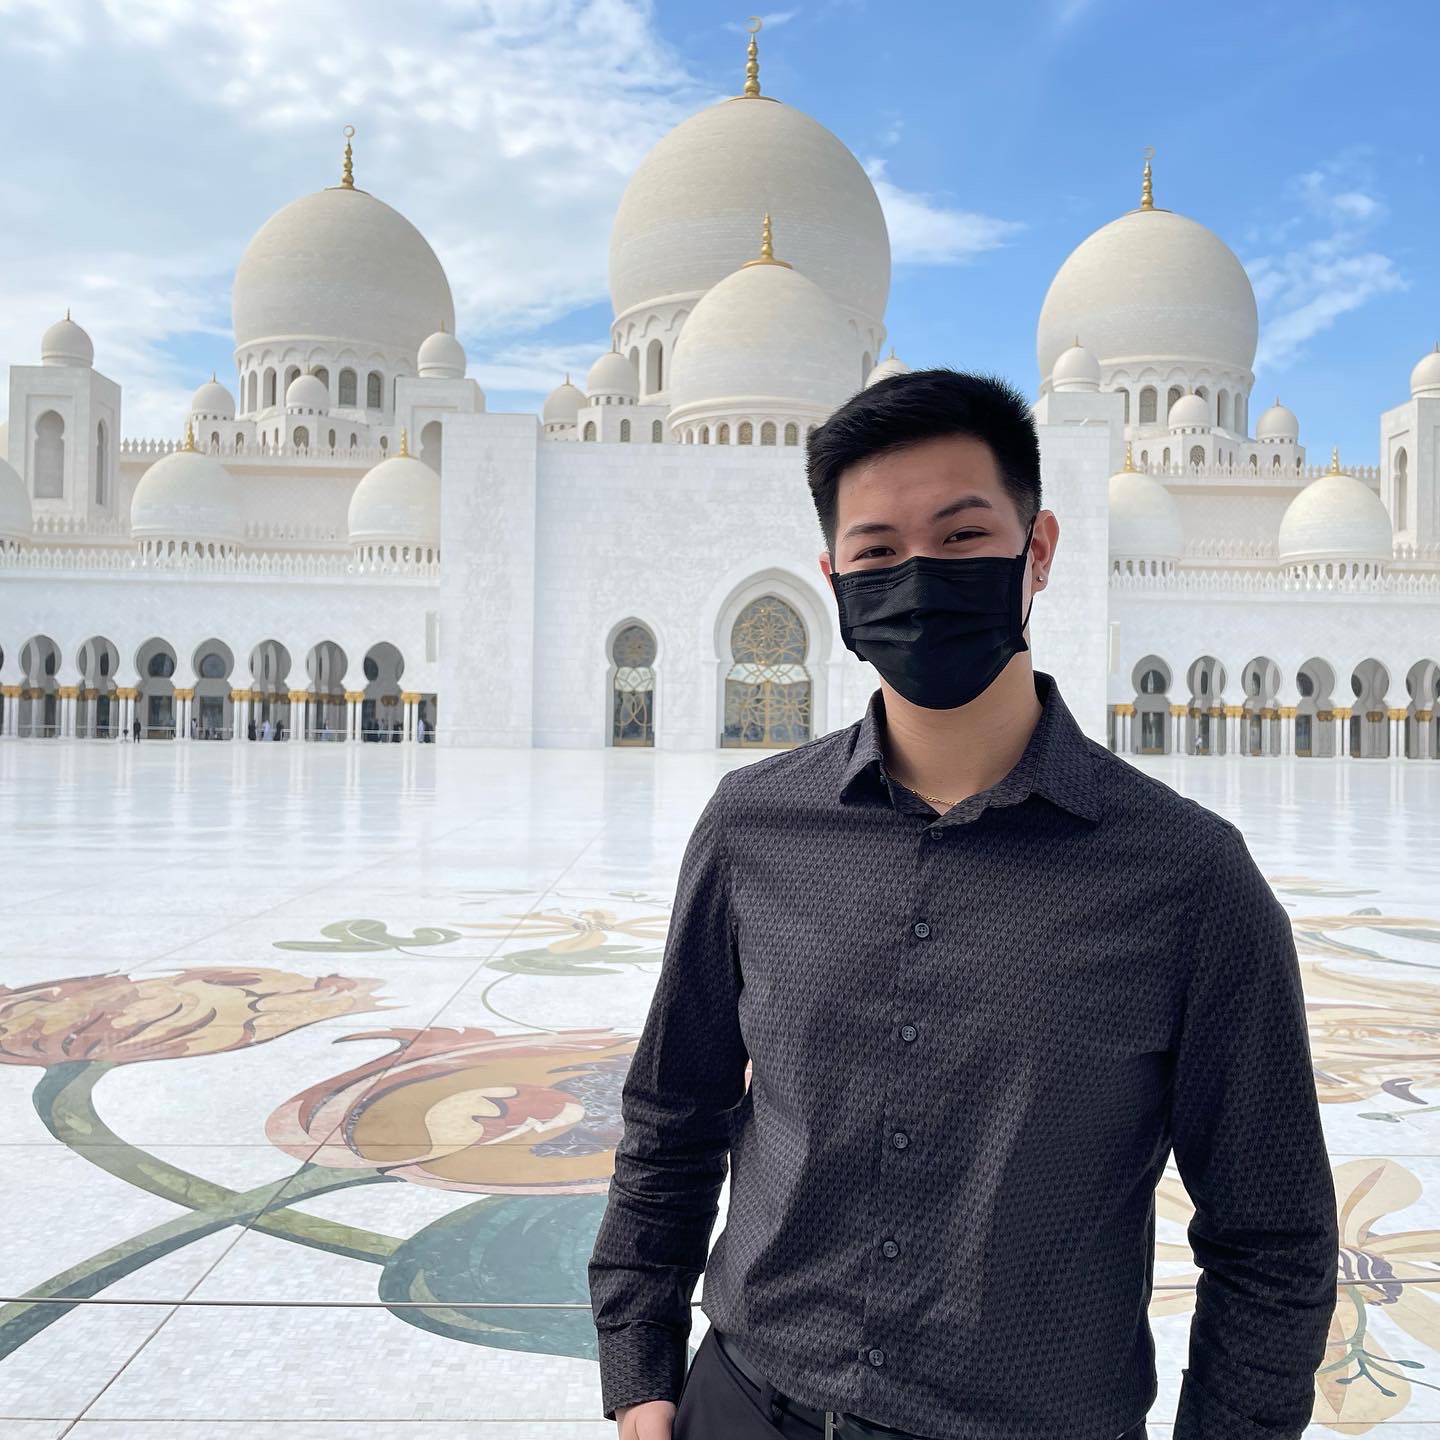 David standing in front of the Grand Mosque in Abu Dhabi.